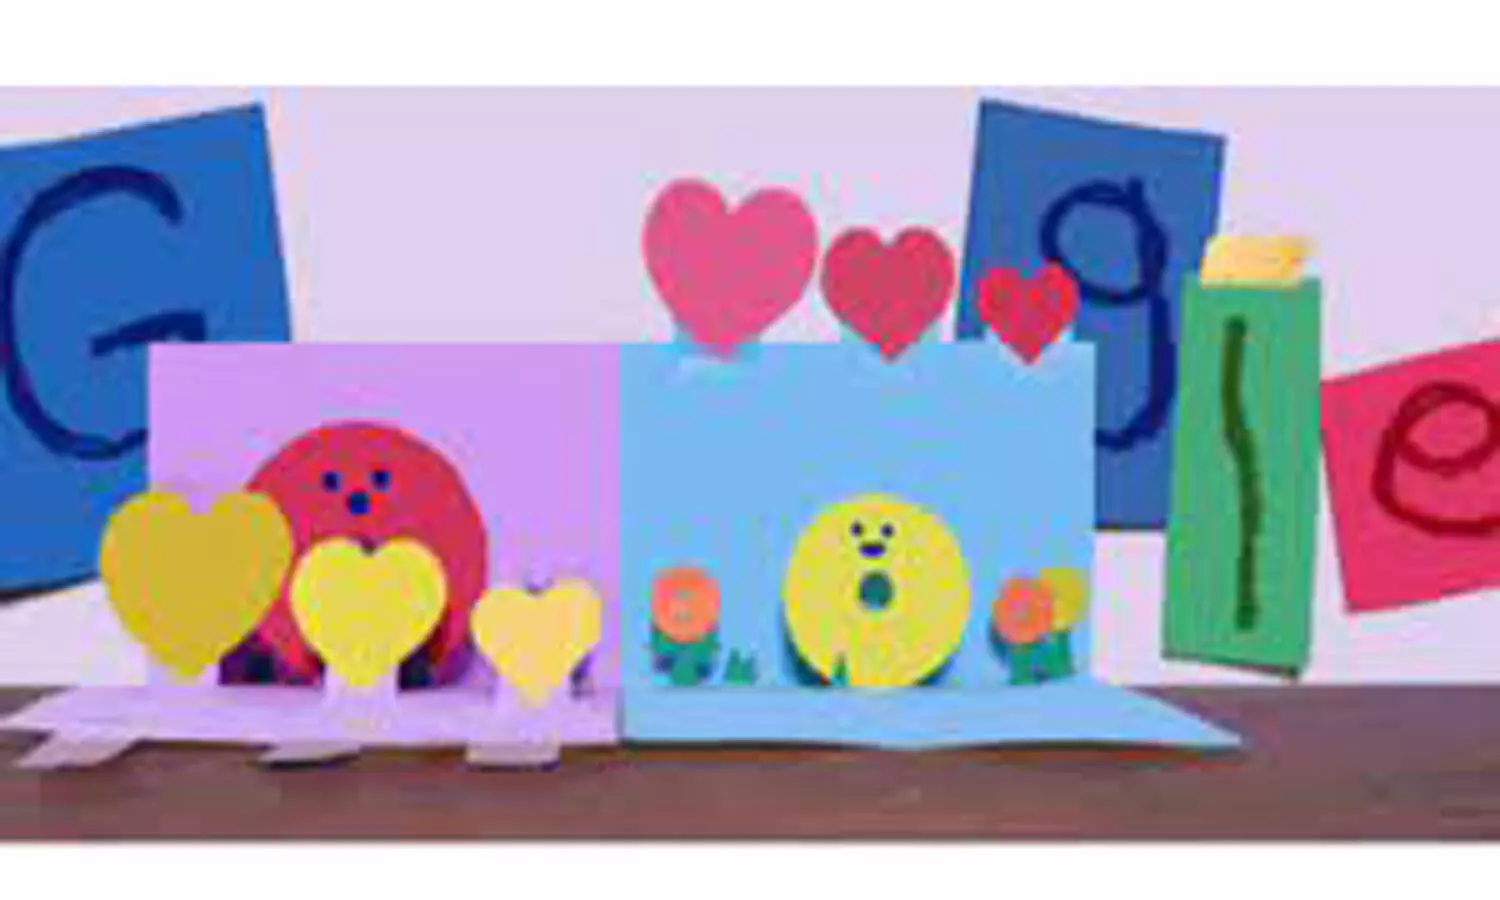 Mothers Day 2021: Google Doodle pops up with a heartfelt card